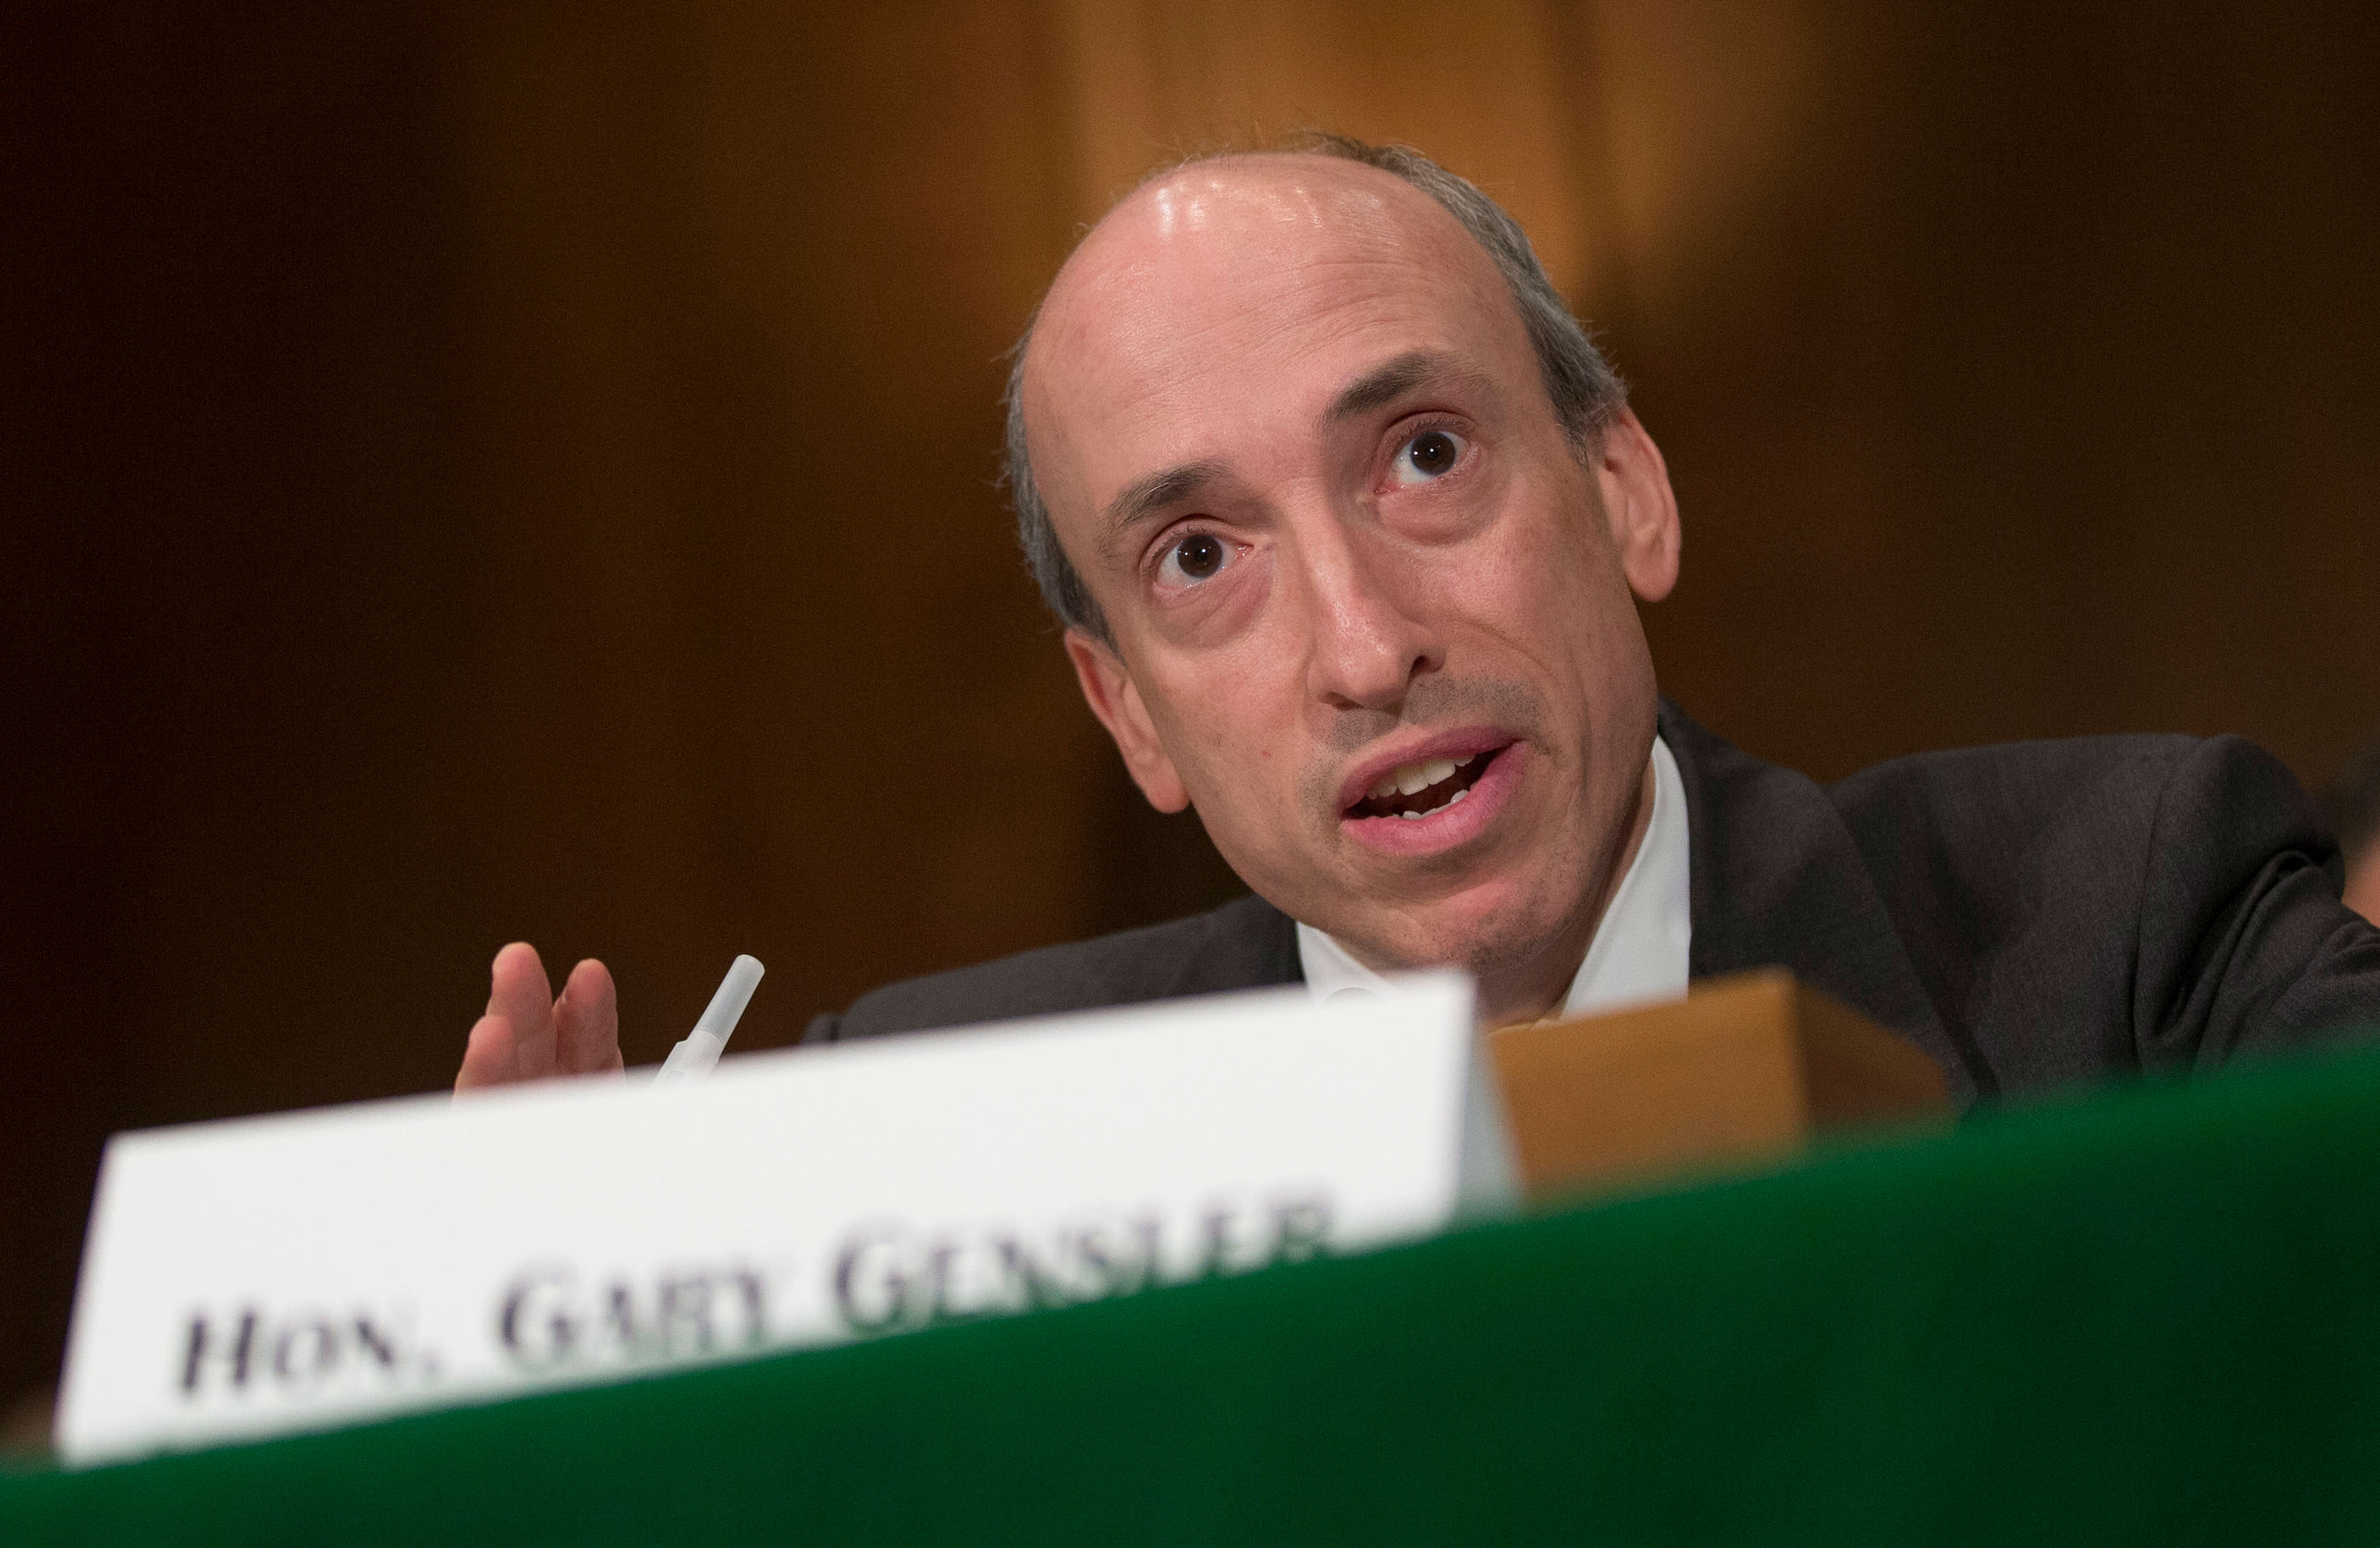 Gary Gensler confirmed by the Senate that he should lead the SEC, Wall Street’s top regulator